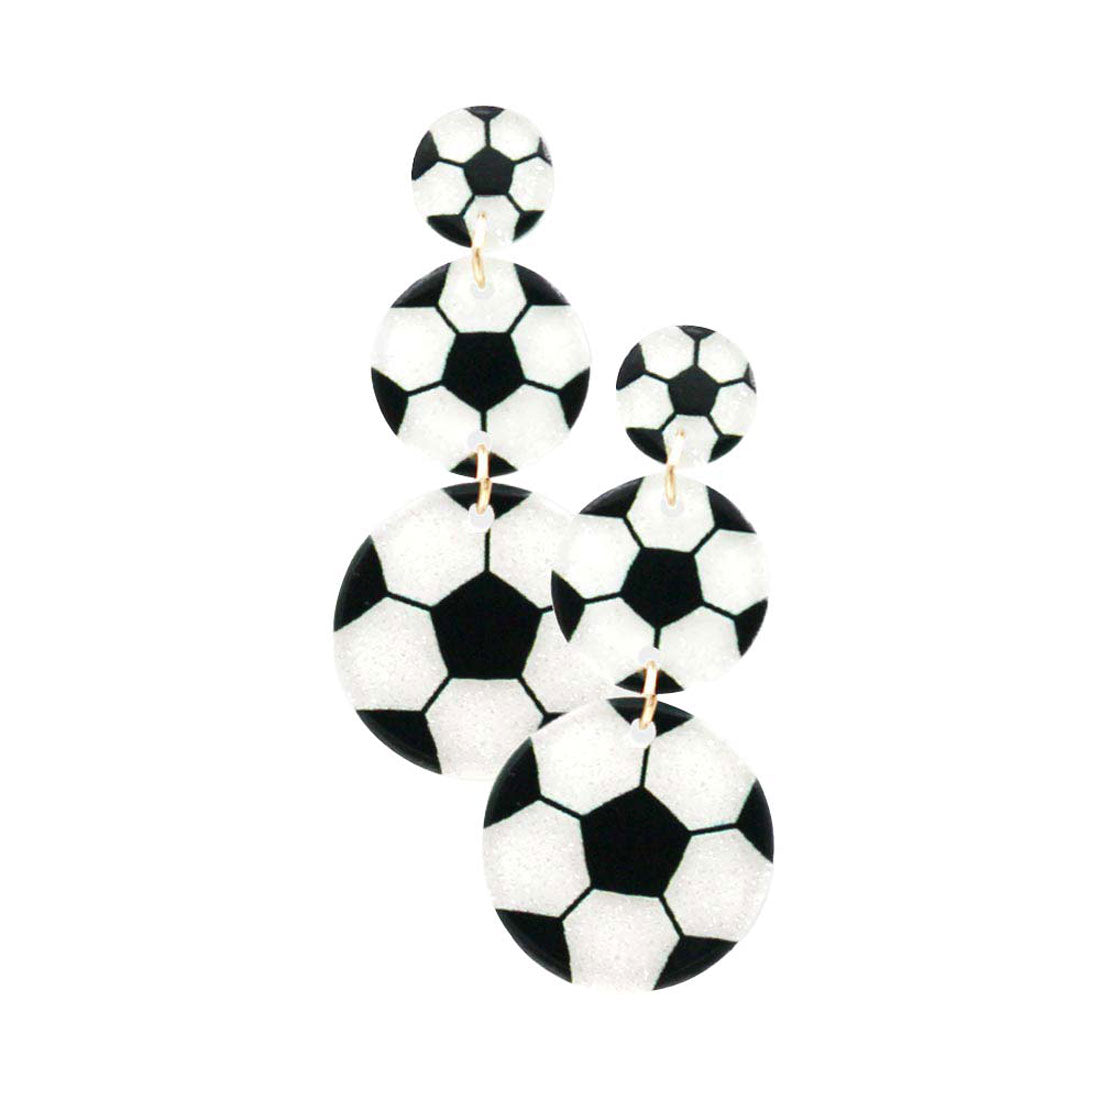 Black White Acetate Soccer Link Earrings. Beautifully crafted design adds a gorgeous glow to any outfit. Jewelry that fits your lifestyle! Gift someone or yourself these ultra-chic earrings, they will take your look up a notch, these sports themed earrings versatile enough for wearing straight through the week, coordinate with any ensemble from business casual to wear, the perfect addition to every outfit. Perfect jewelry gift to expand a woman's fashion wardrobe with a modern, on trend style.